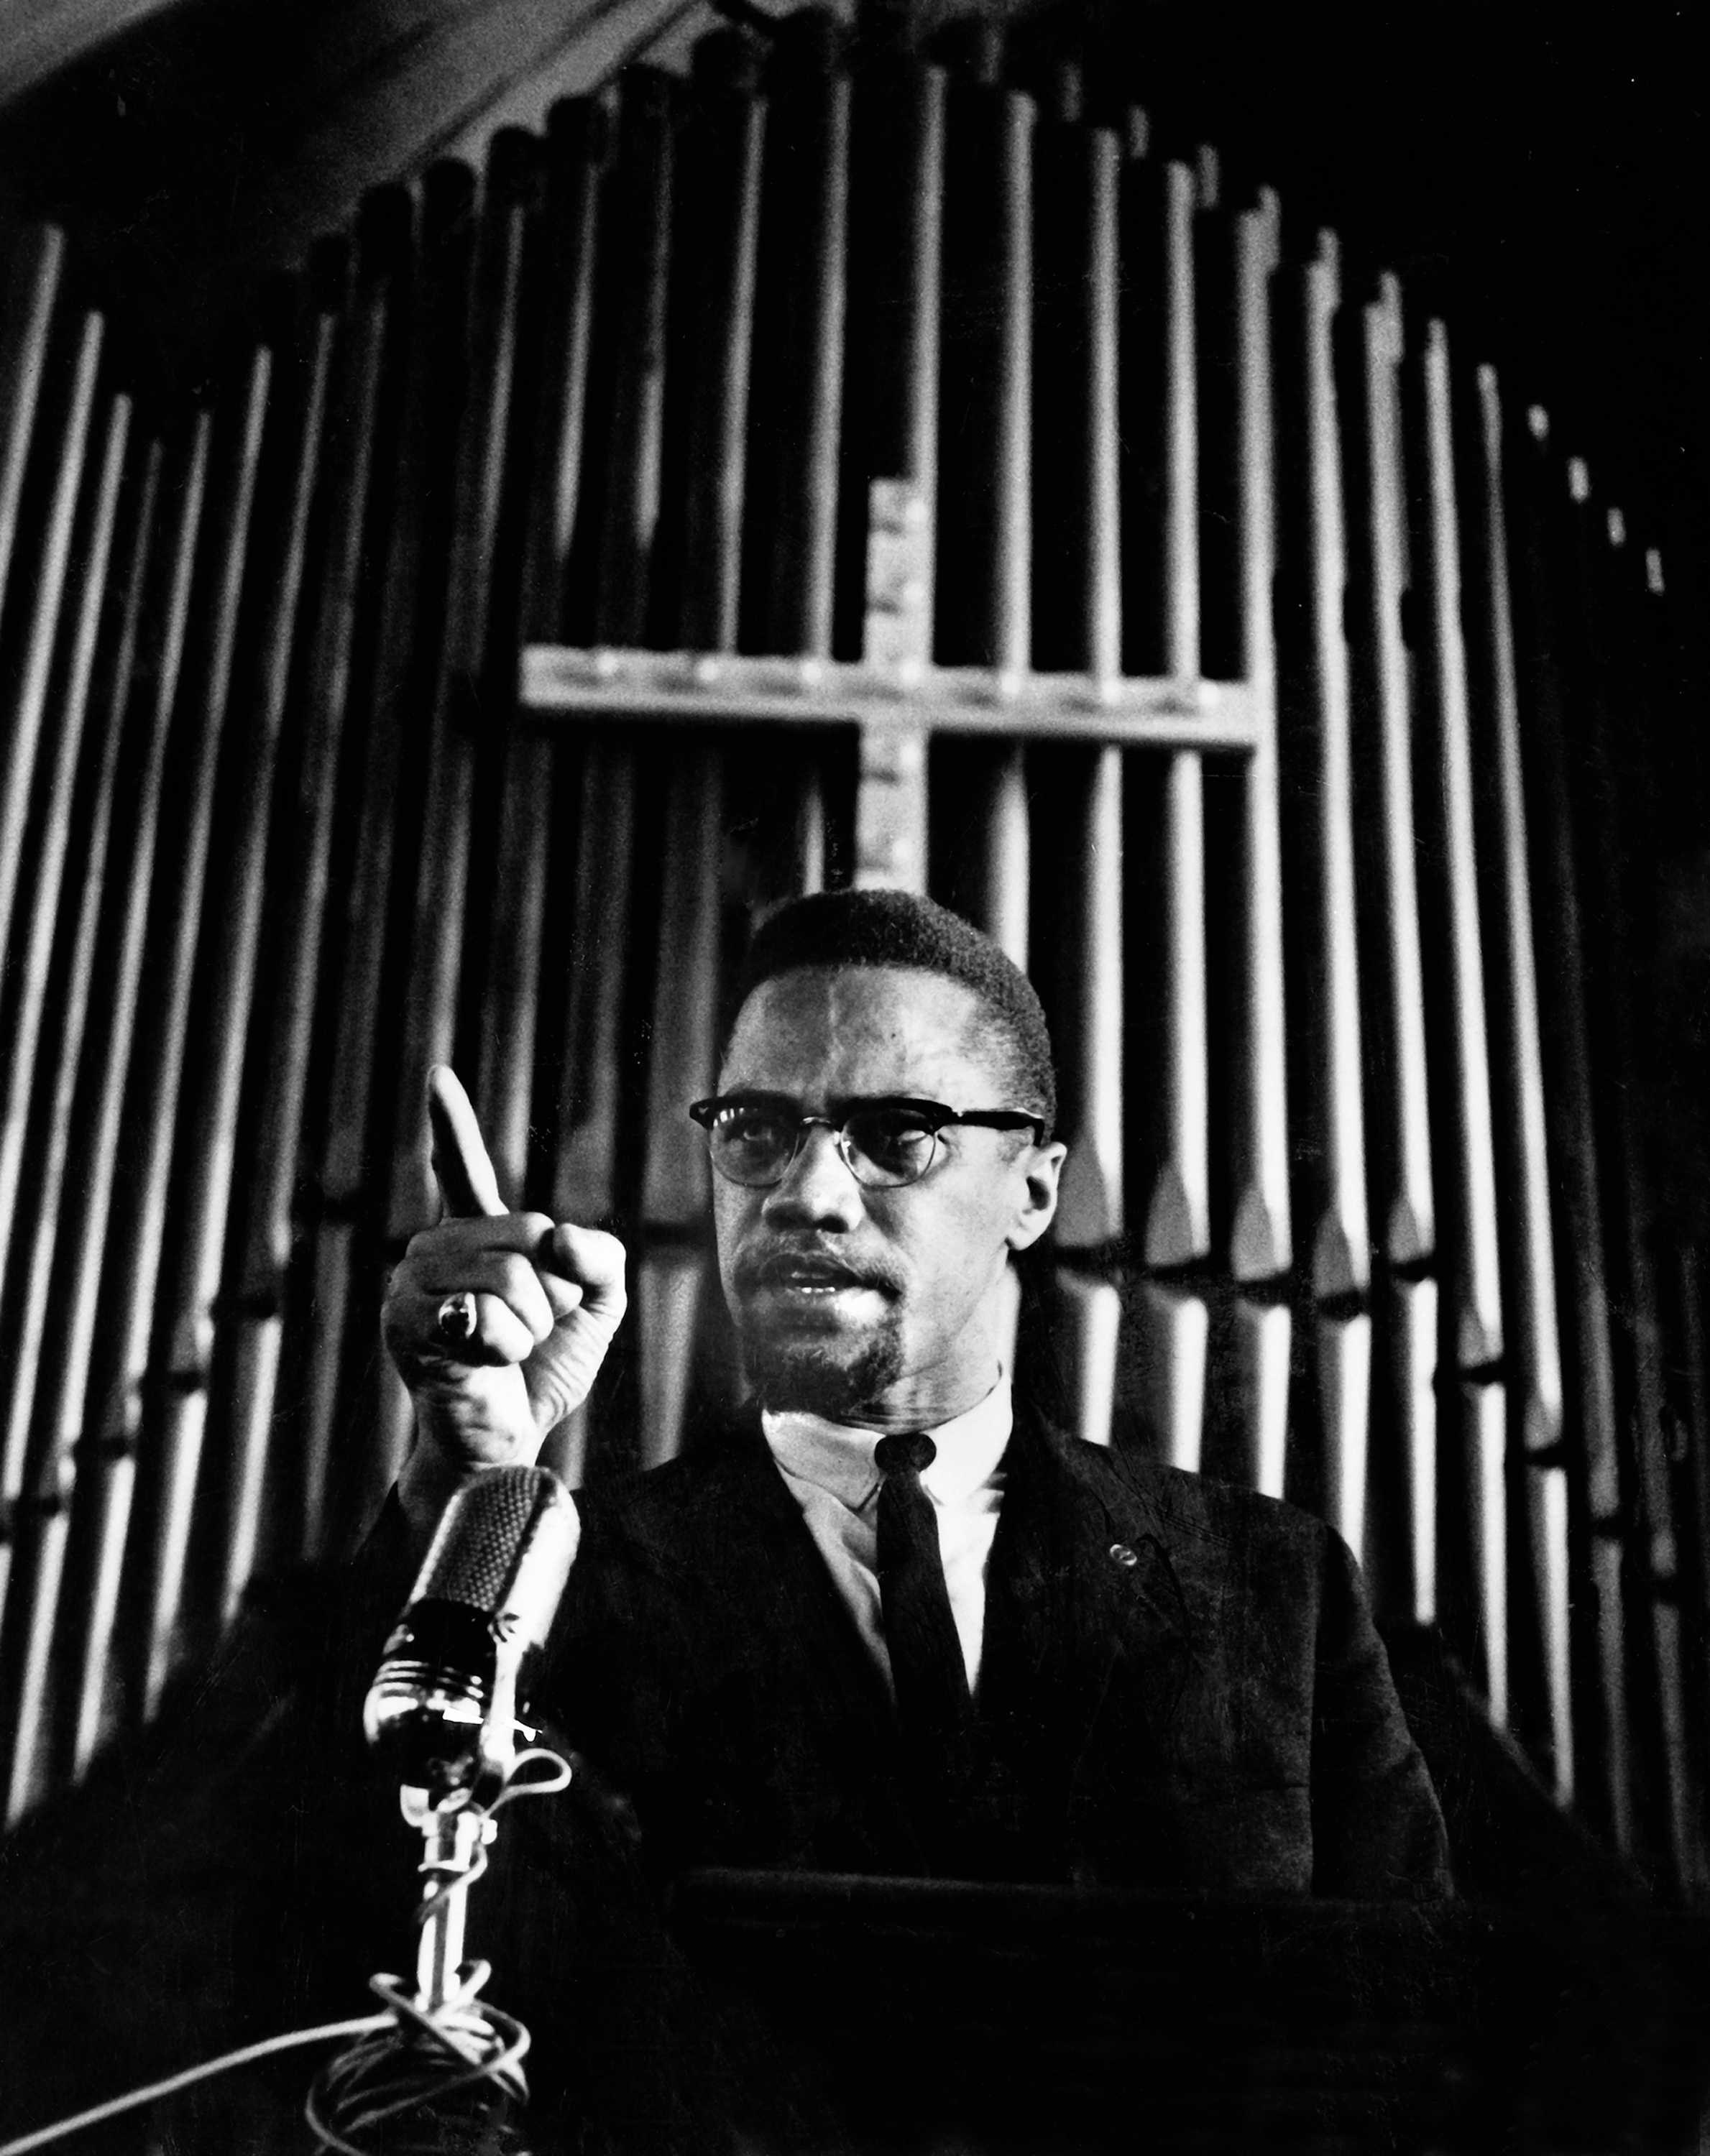 Black and white photograph of Malcolm X addressing a mass meeting at Brown Chapel AME Church, Selma, Alabama